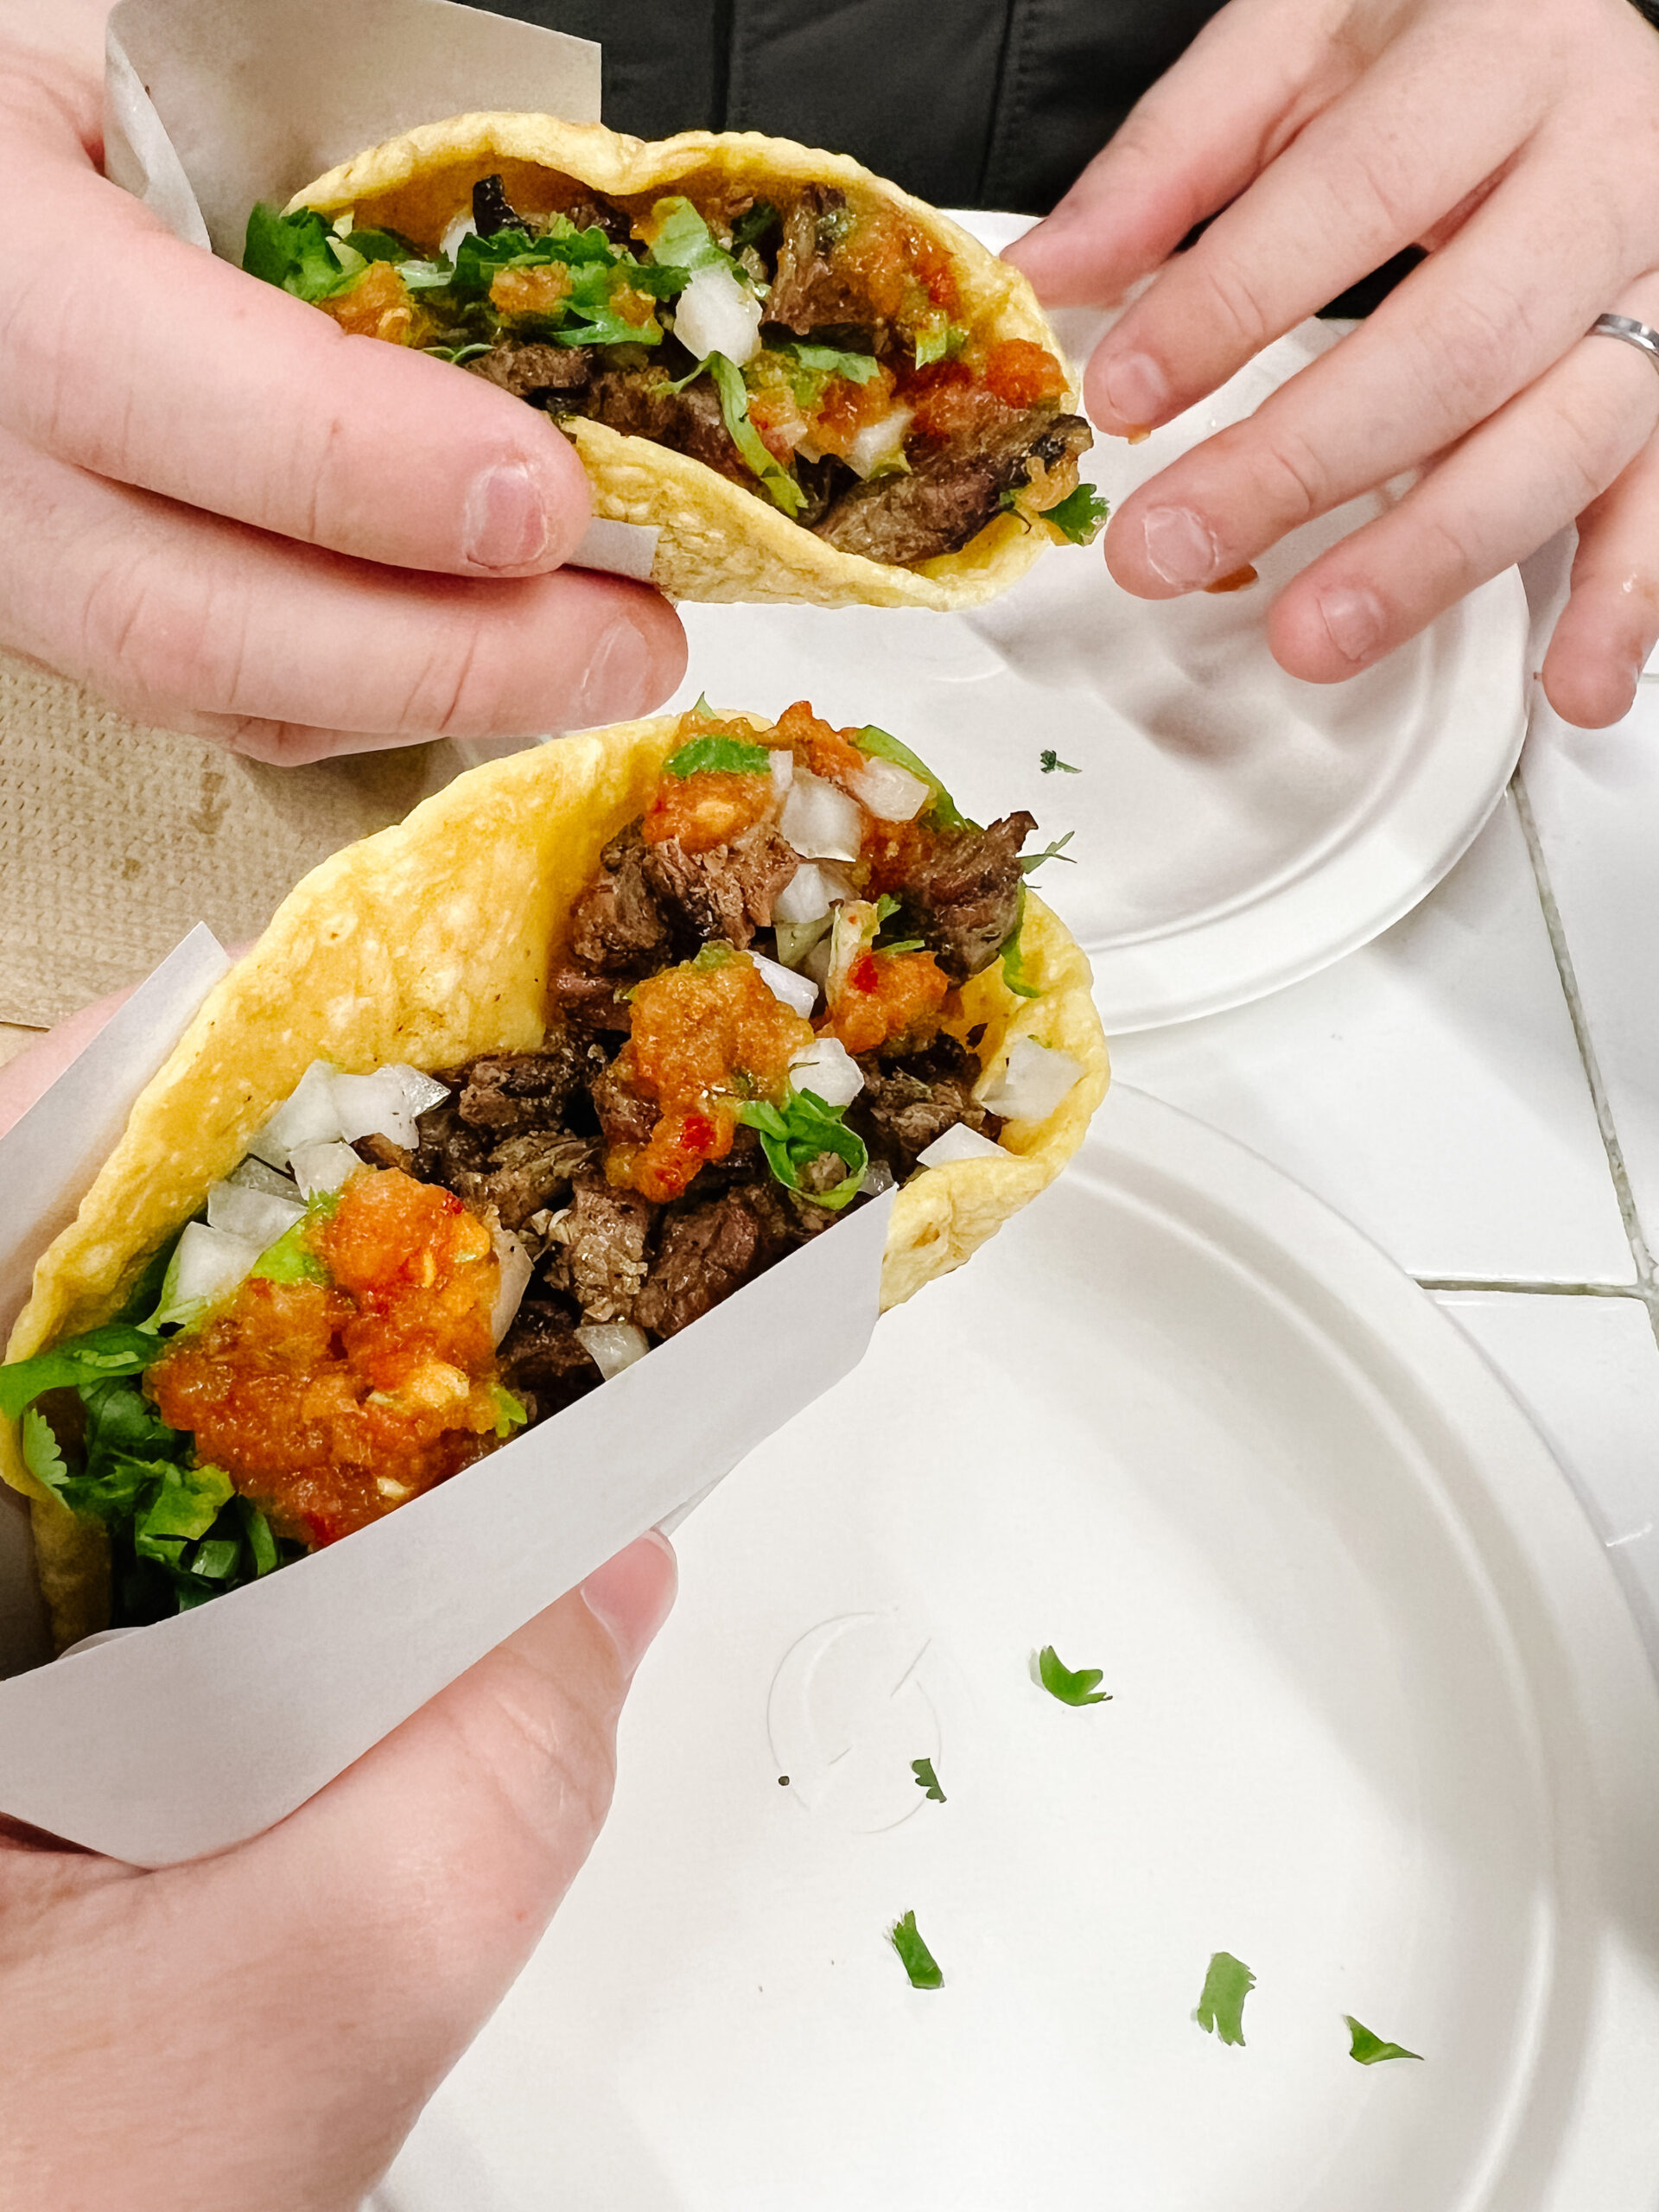 Steak tacos from Los Tacos No 1 in New York City